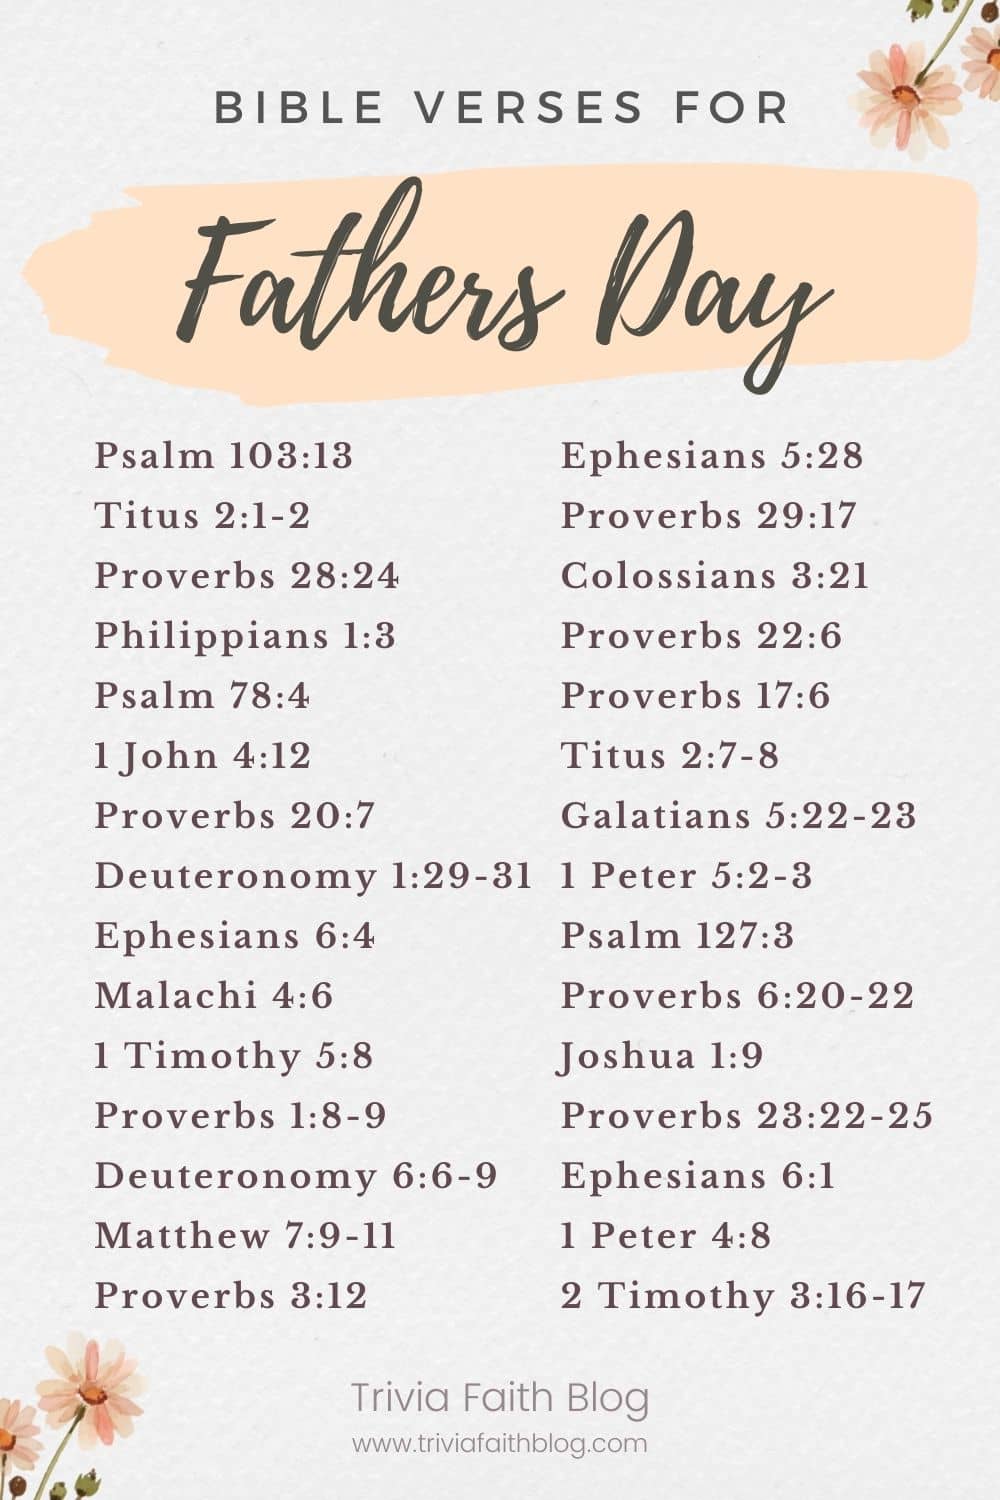 Bible verses about fathers day